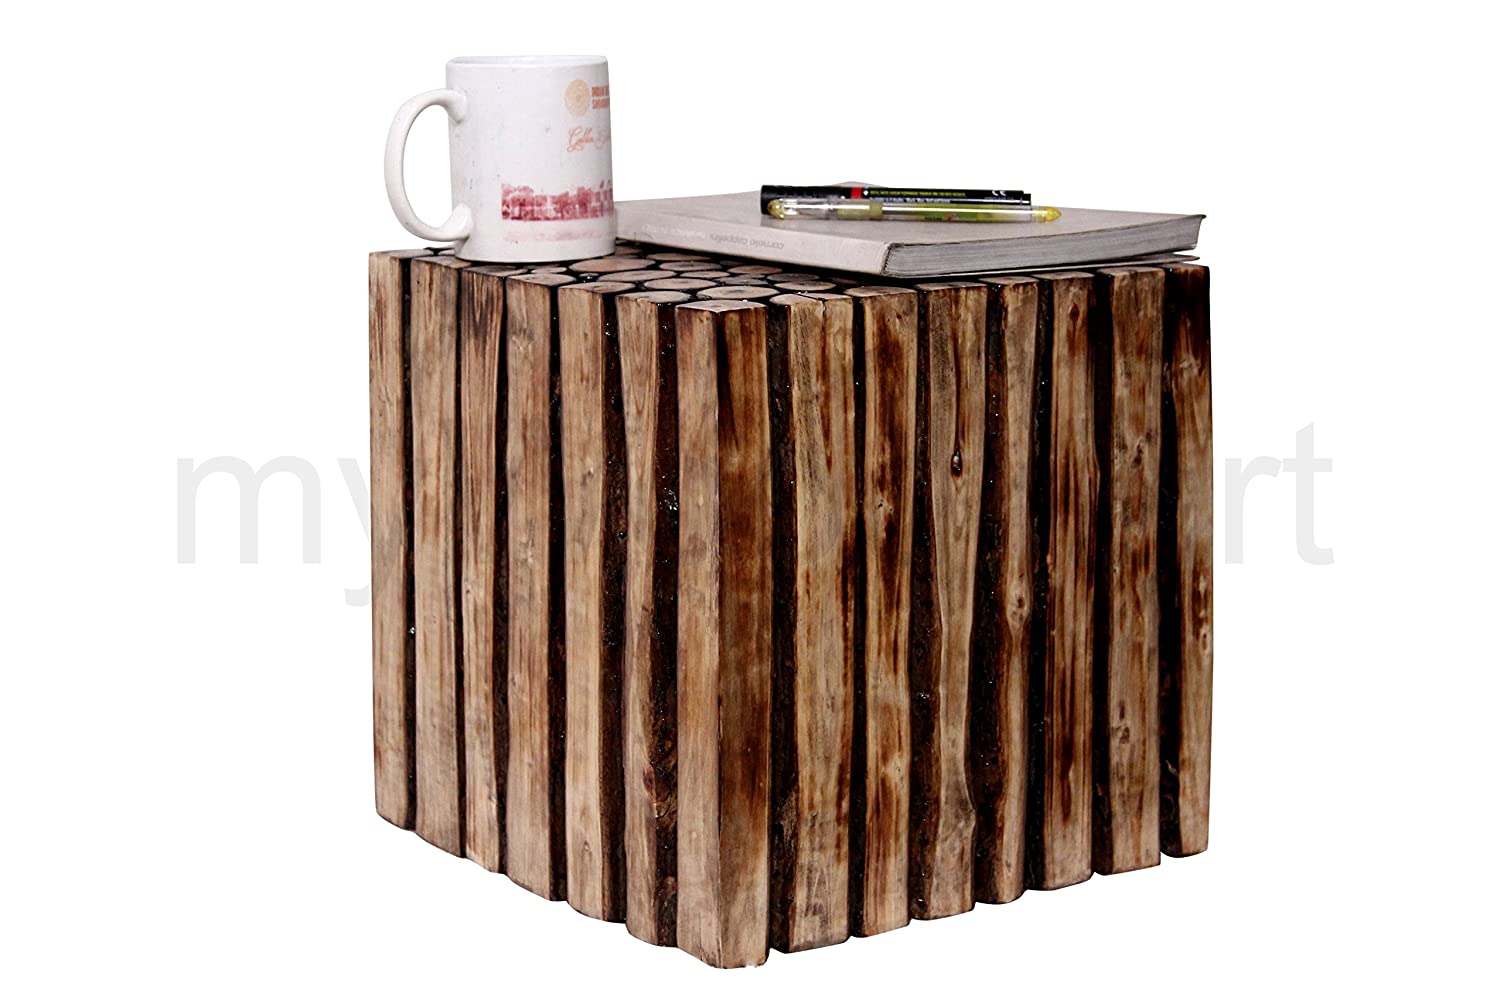 Square Wooden Stool Natural Wood Logs Best Used as Bedside Tea Coffee Plants Table for Bedroom Living Room Outdoor Garden Furniture